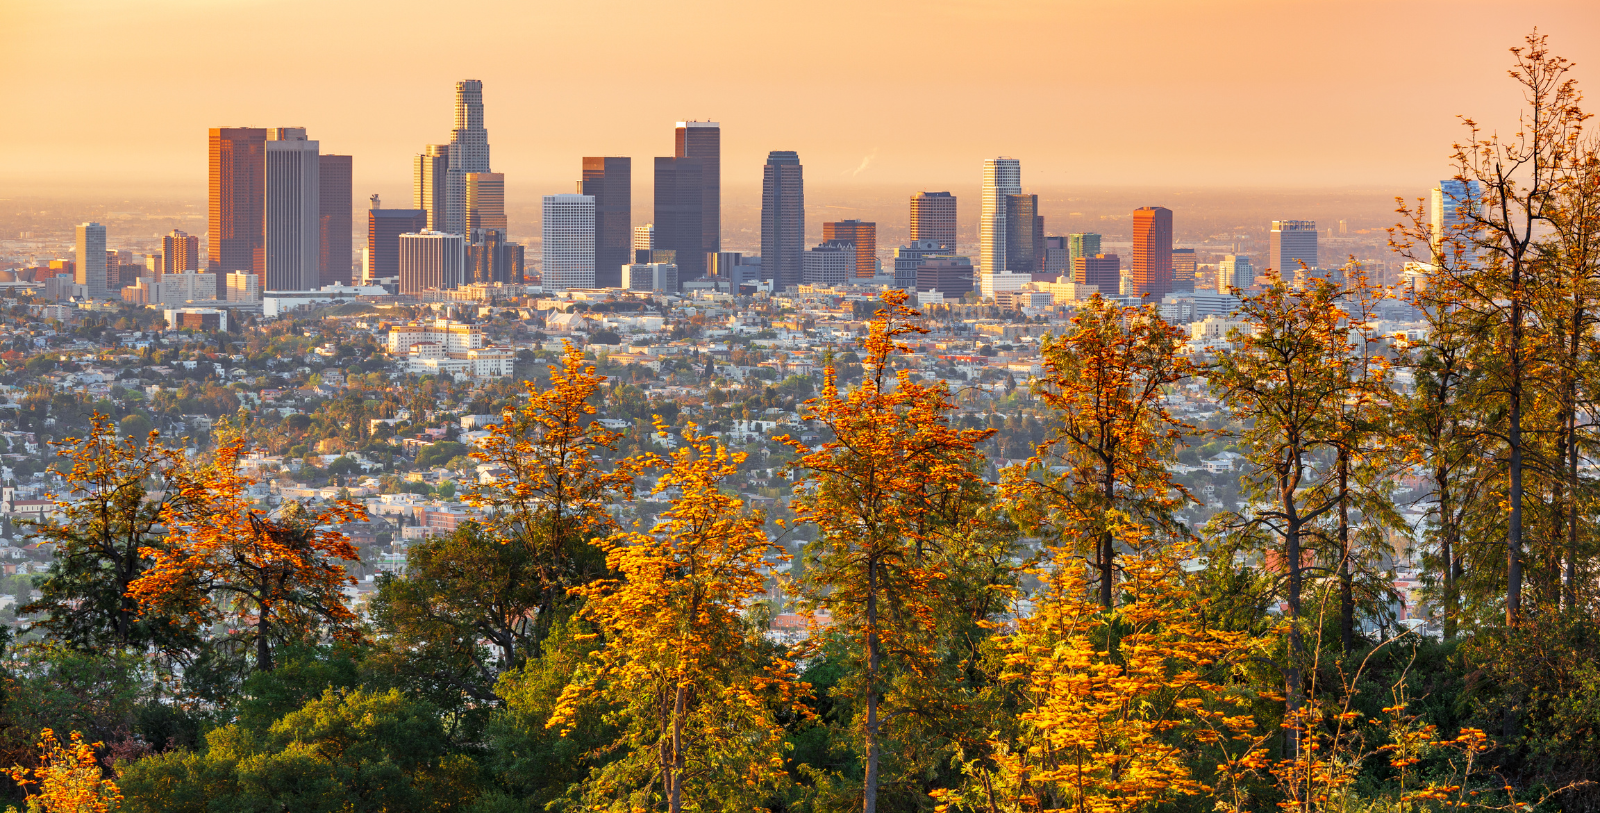 Soak up the creative energy of Los Angeles, home to Hollywood, 11 professional sports teams, and 263 days of sunshine.